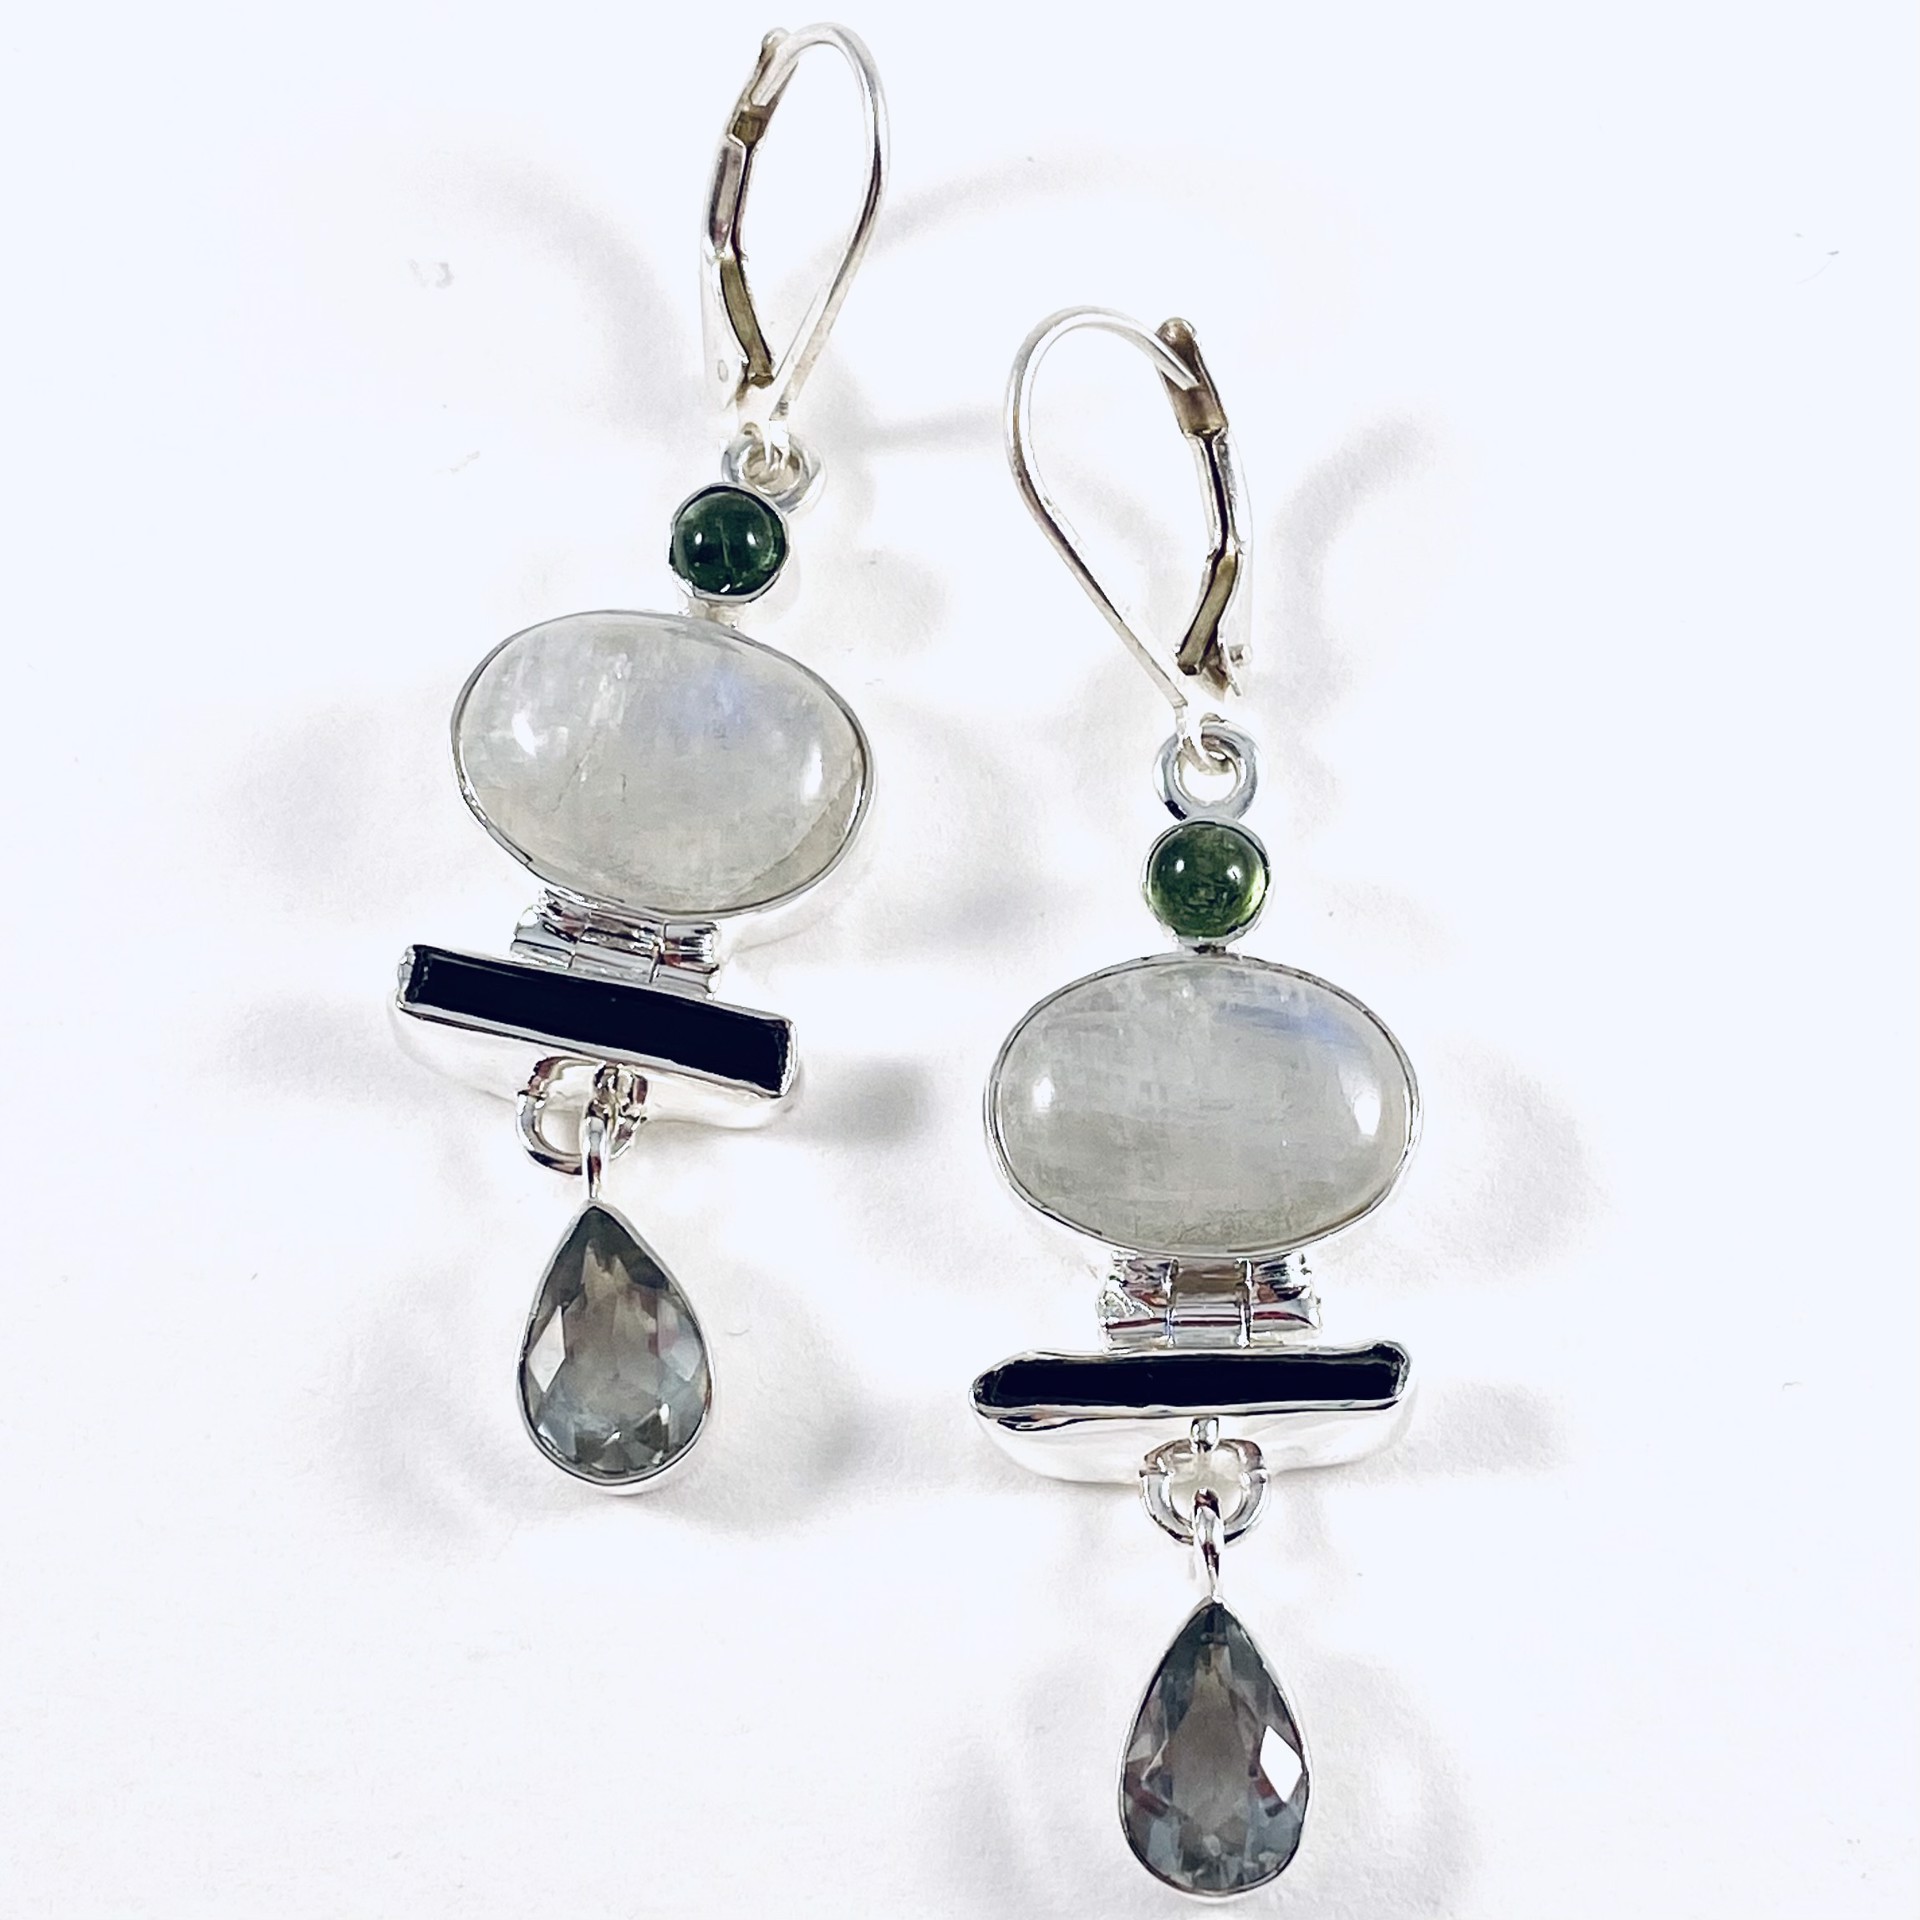 MON21-2E Moonstone, Green Amethyst and Tourmaline Earrings, french wire clasp by Monica Mehta